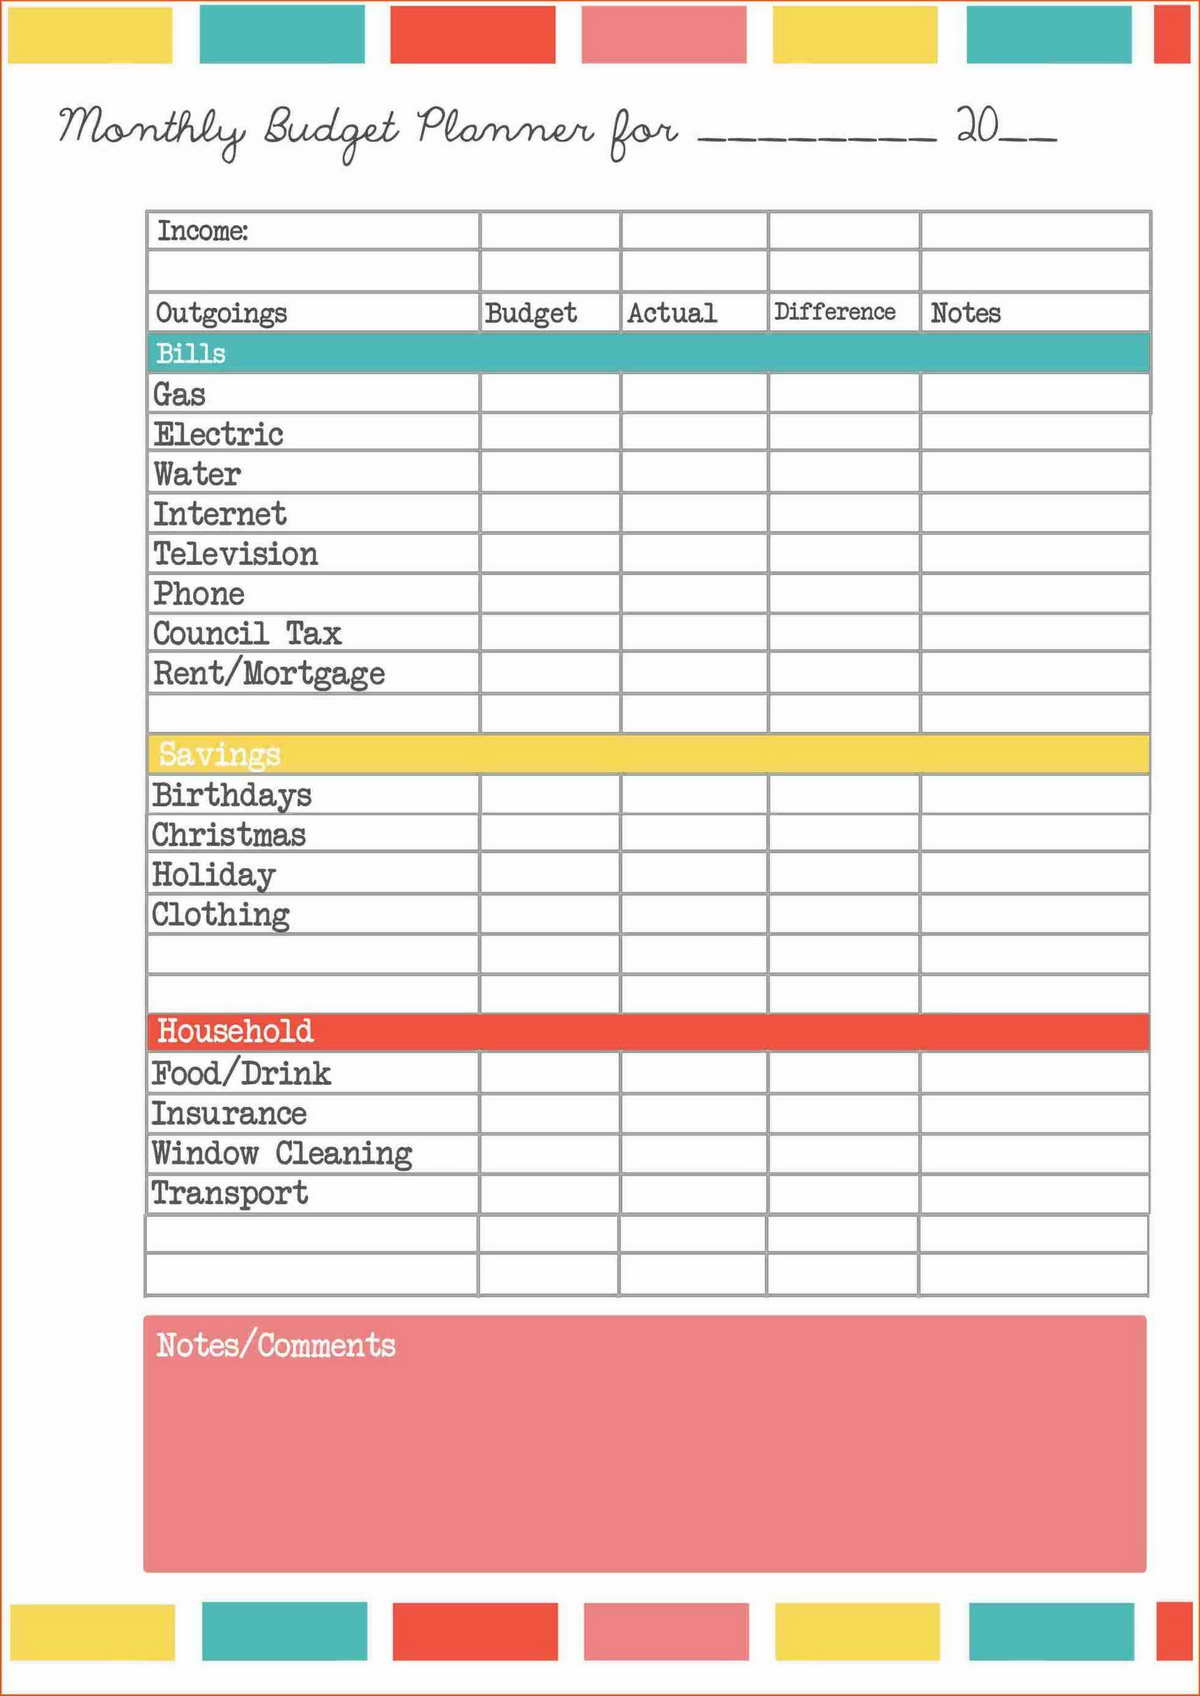 Small Business Expenses Spreadsheet On Budget Spreadsheet Excel To New Business Expenses Spreadsheet